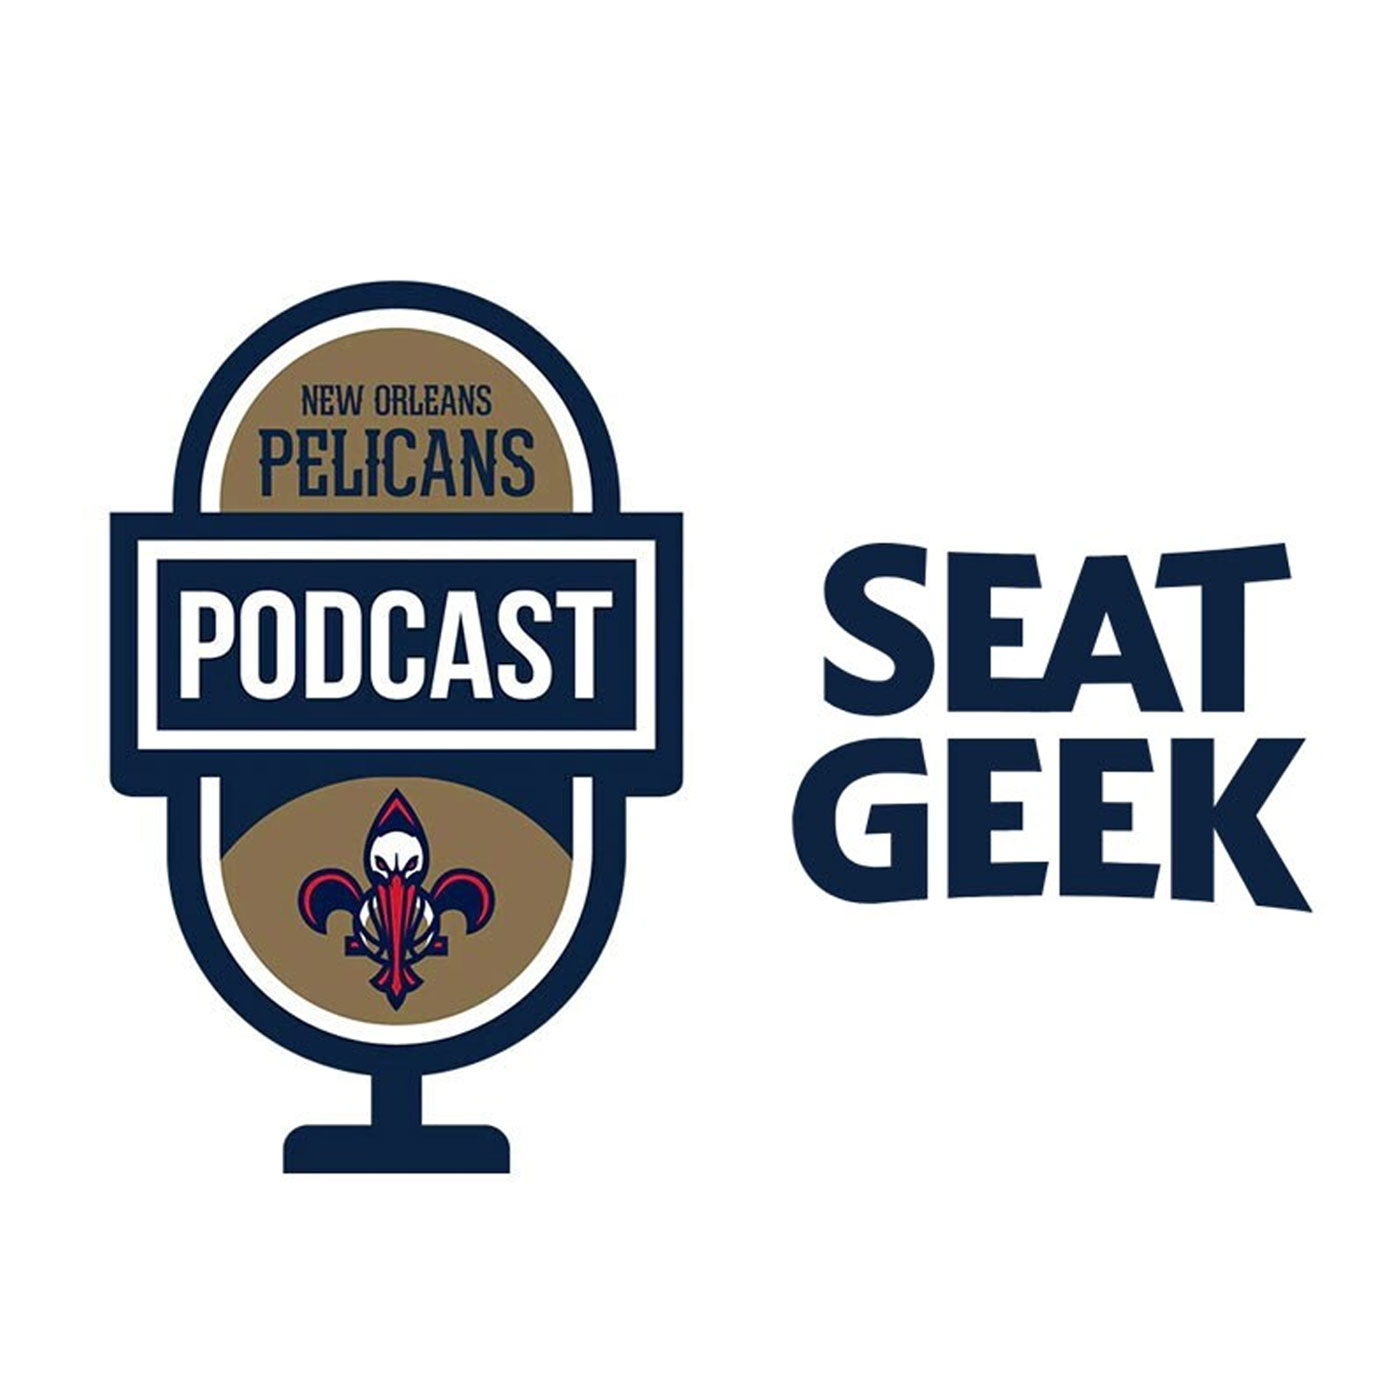 Season Recap on the New Orleans Pelicans Podcast presented by Seatgeek - May 4, 2022